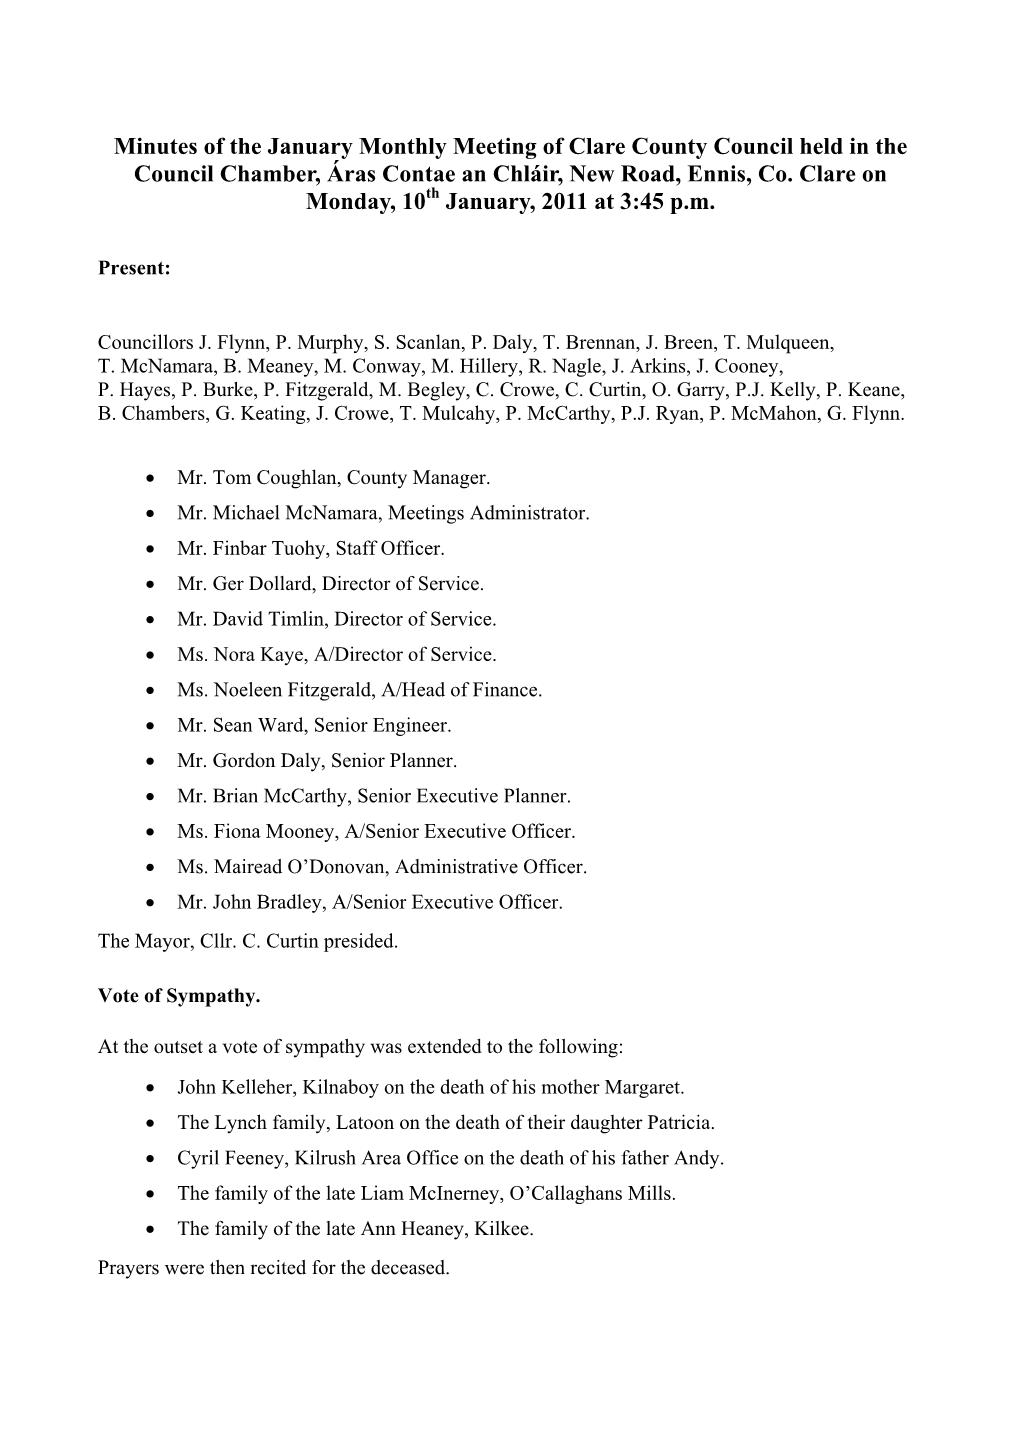 Minutes of the January 2011 Monthly Meeting of Clare County Council